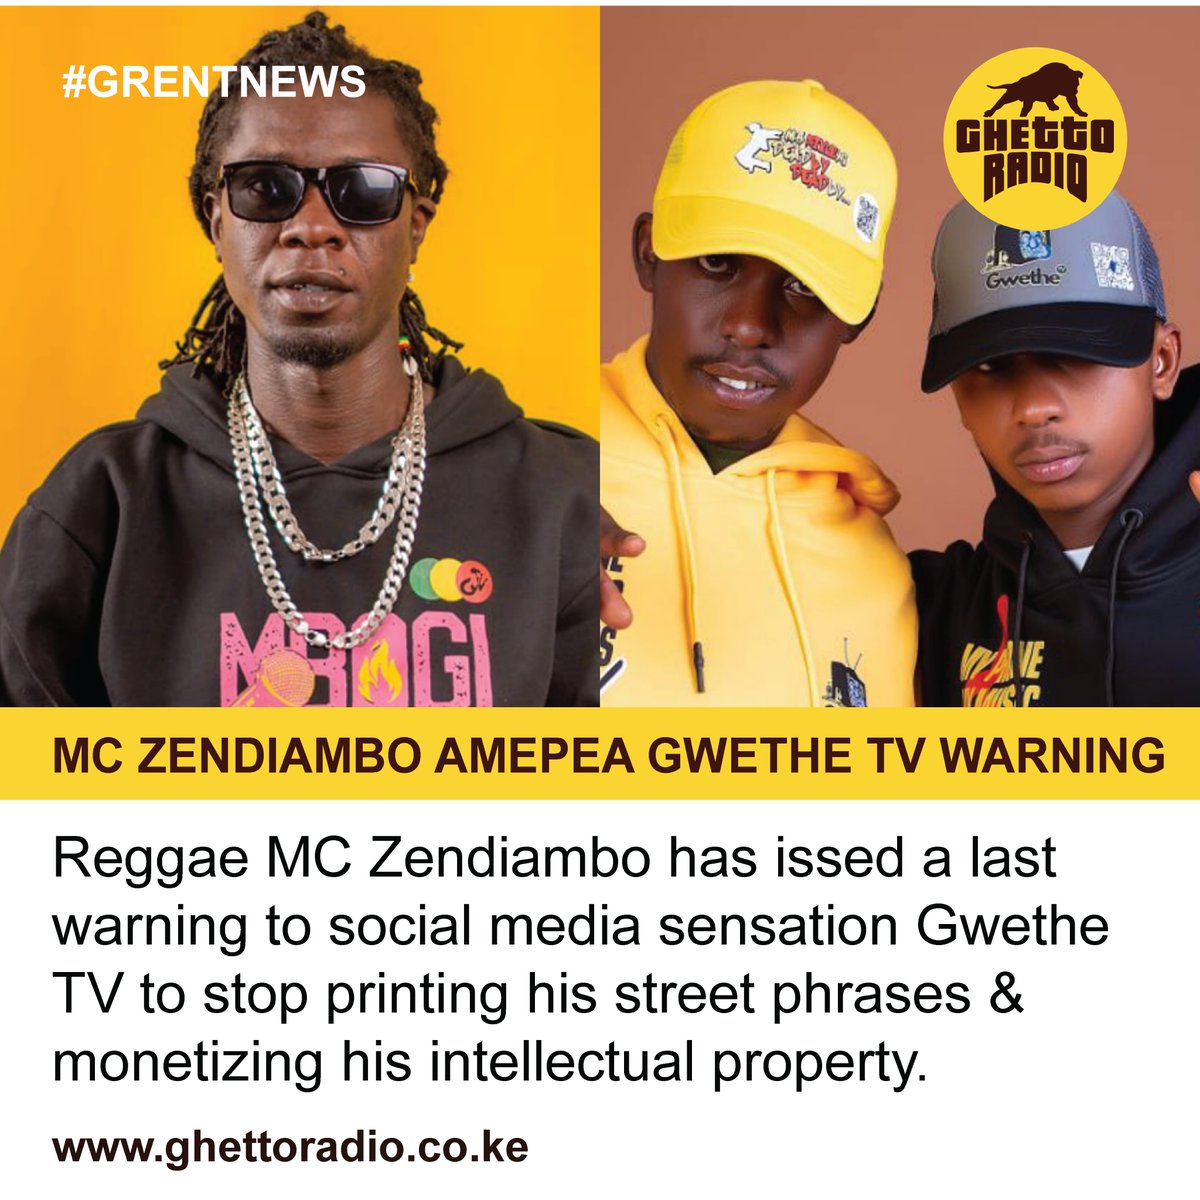 Mc Zendiambo Issues Last Warning To Gwethe Tv to stop printing his street phrases & profiting from them by selling merchandise.
#GREntnews
#Goteana